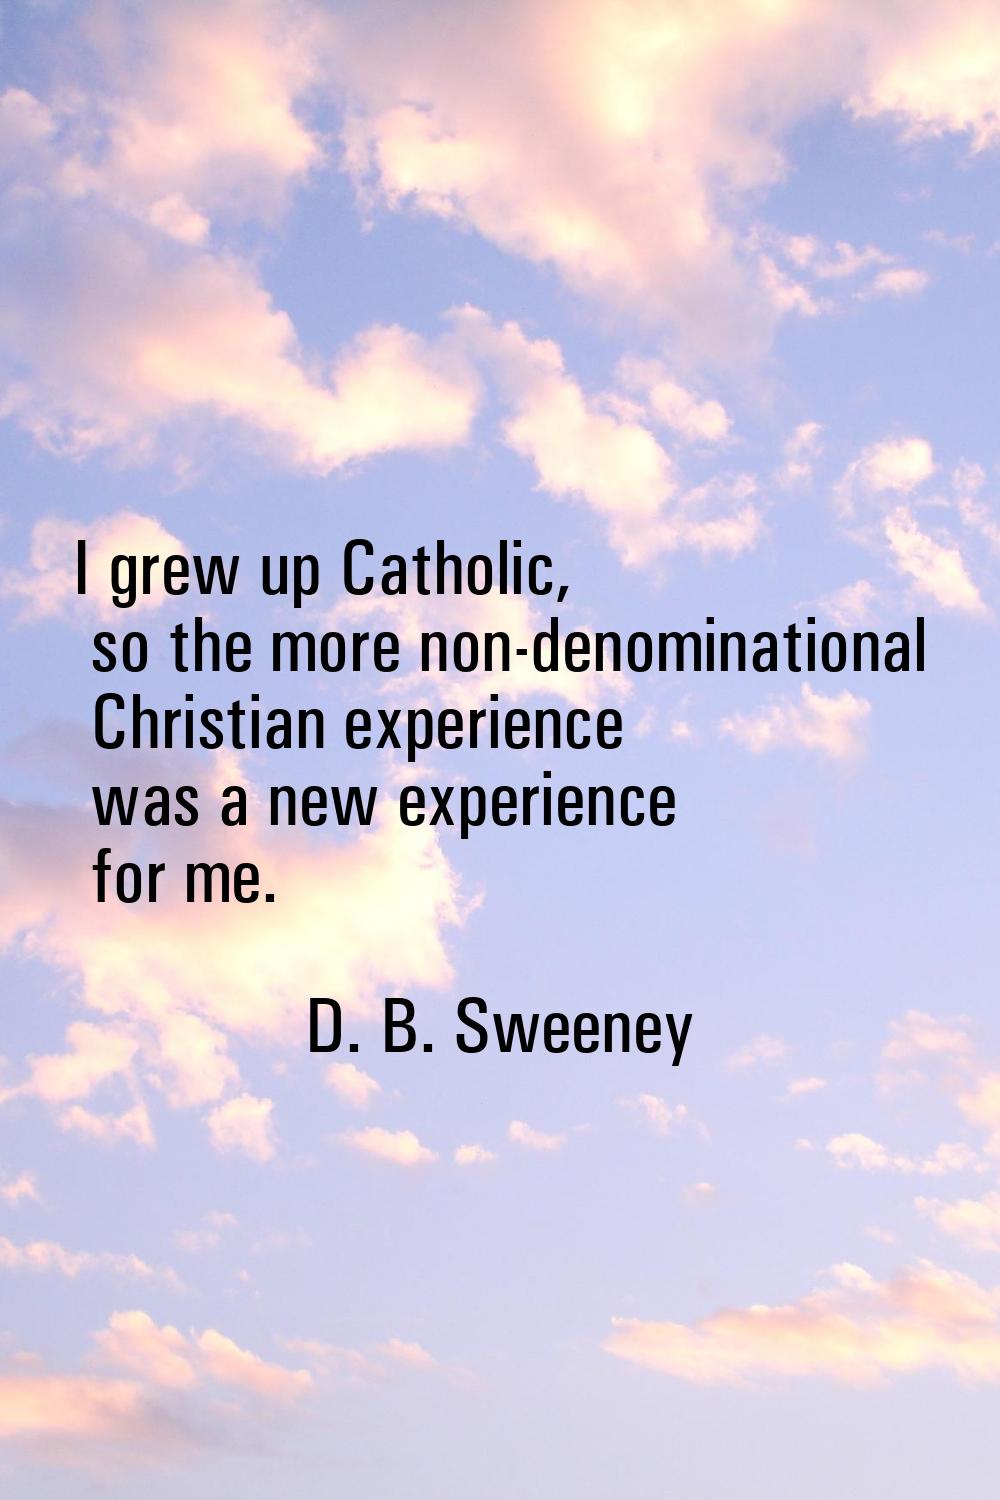 I grew up Catholic, so the more non-denominational Christian experience was a new experience for me